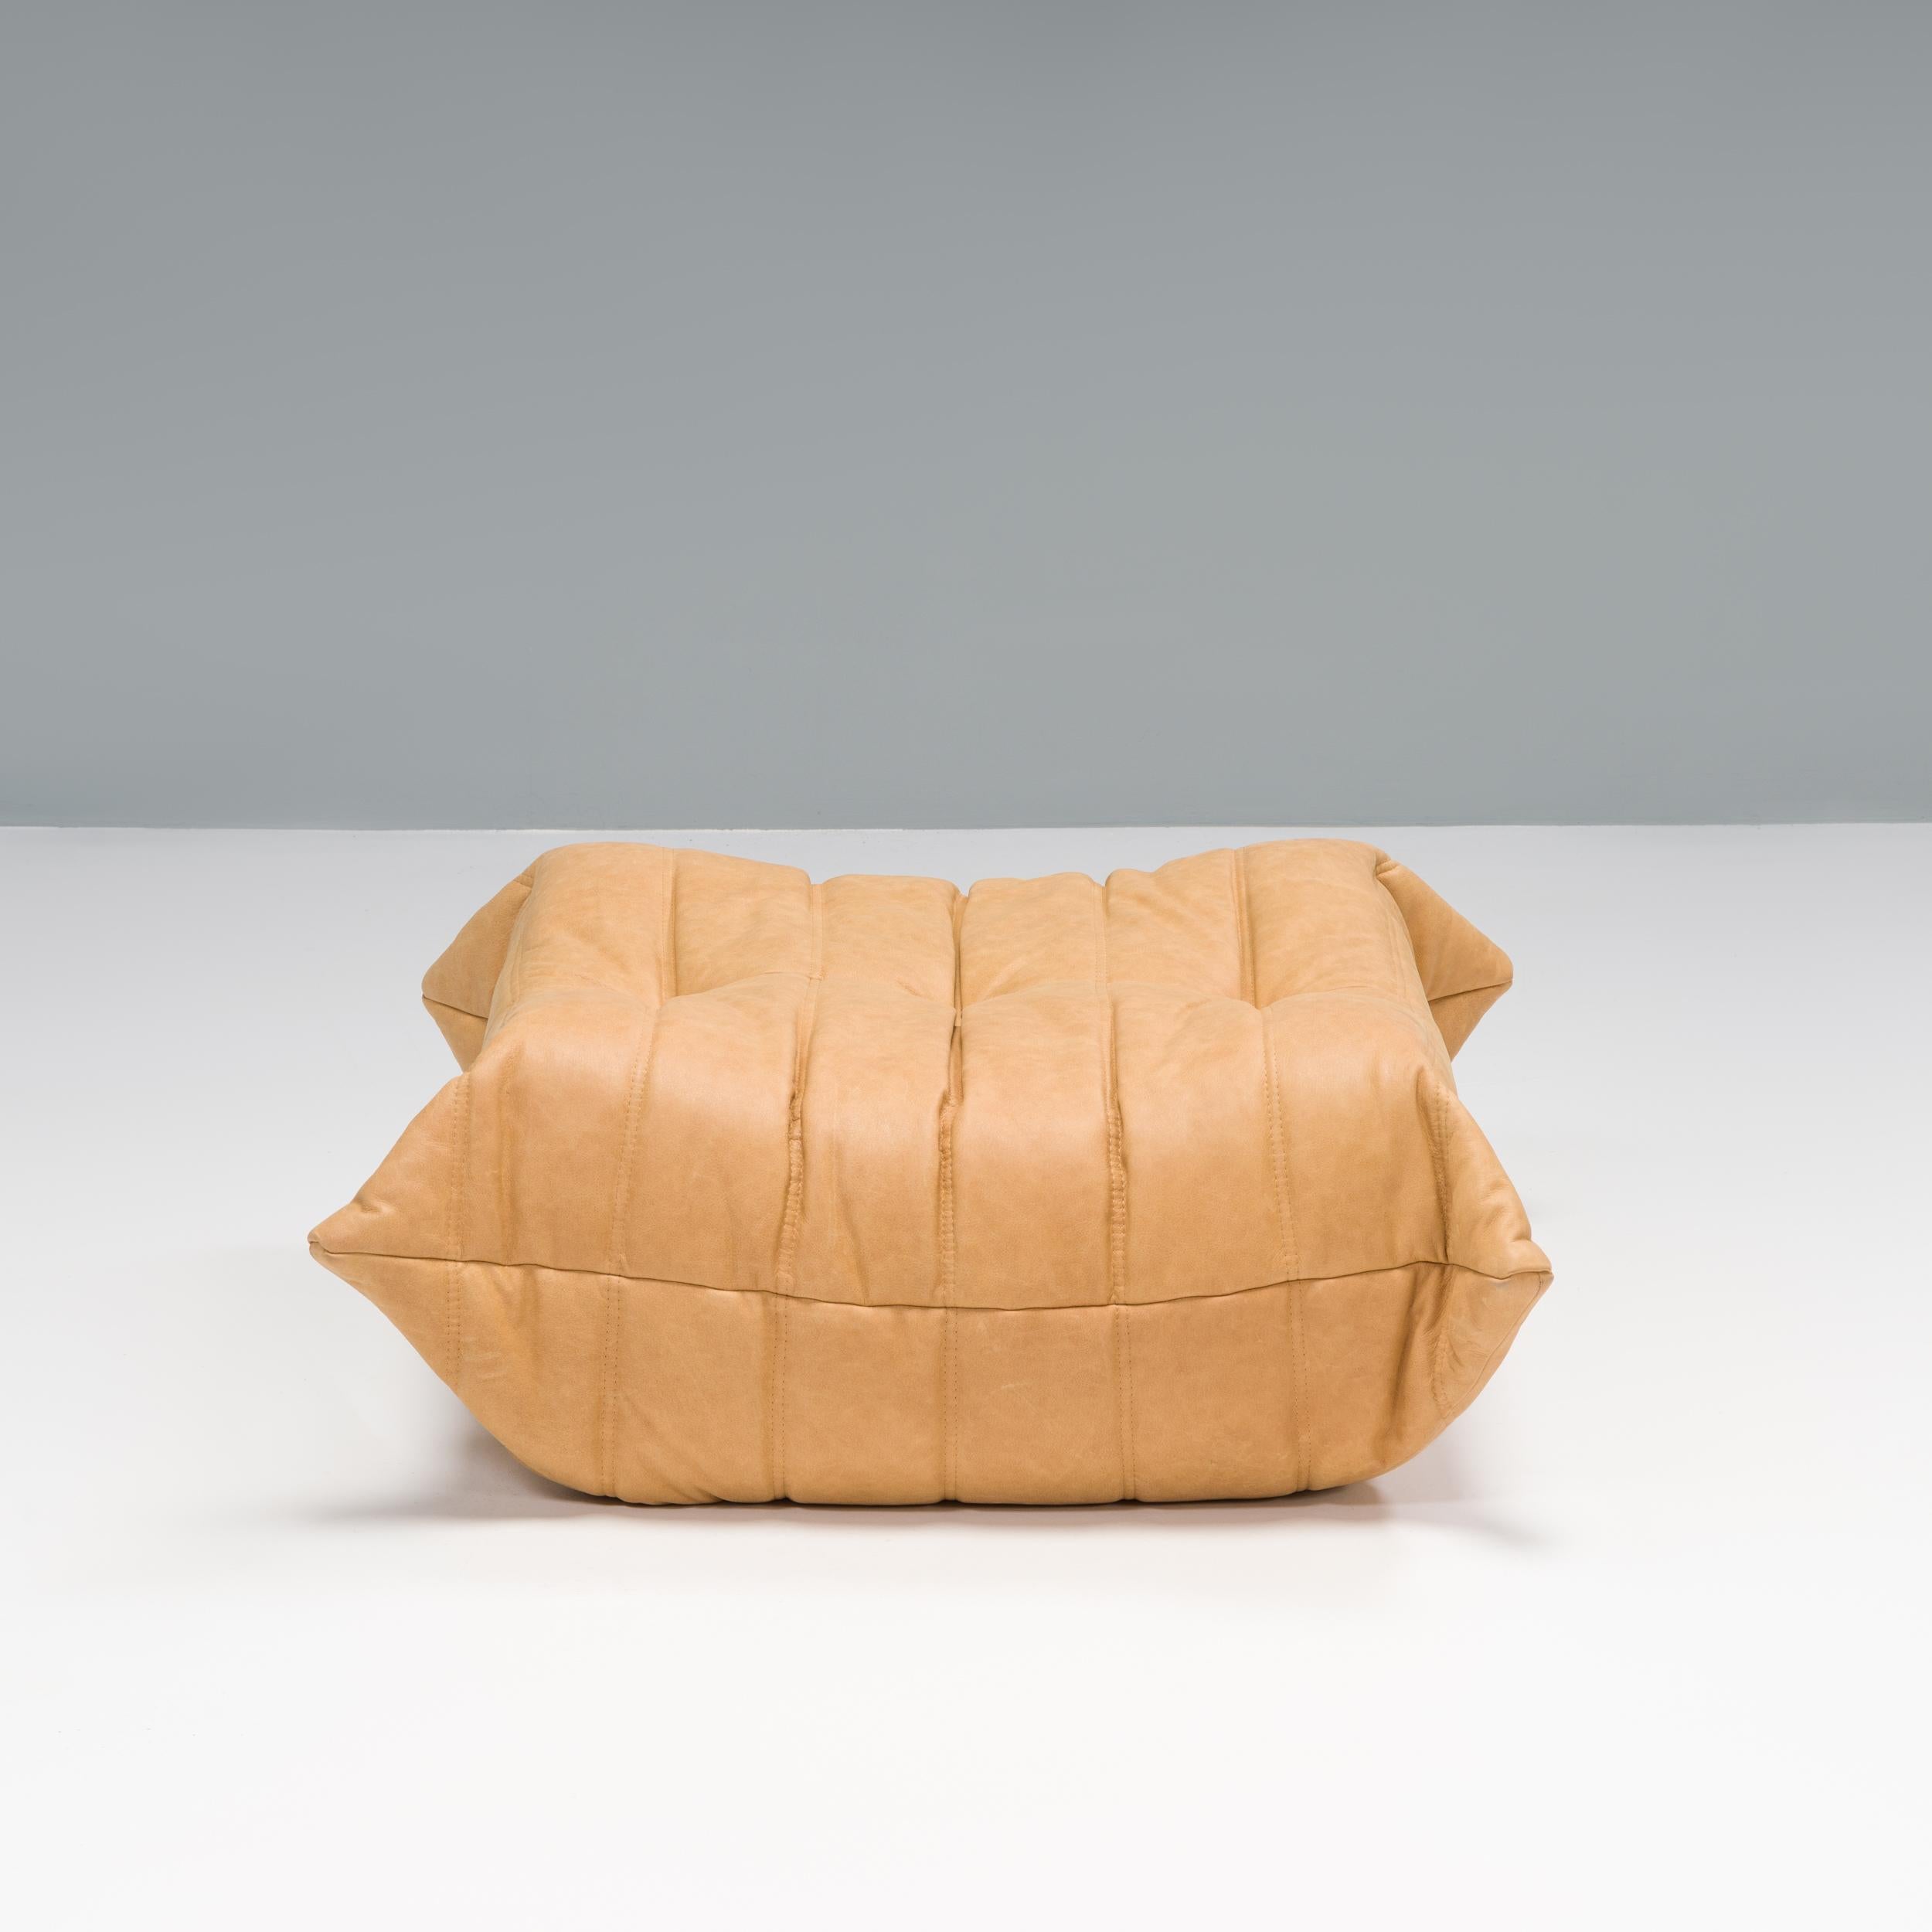 Late 20th Century Ligne Roset by Michel Ducaroy Camel Brown Leather Togo Sofas, Set of Five For Sale